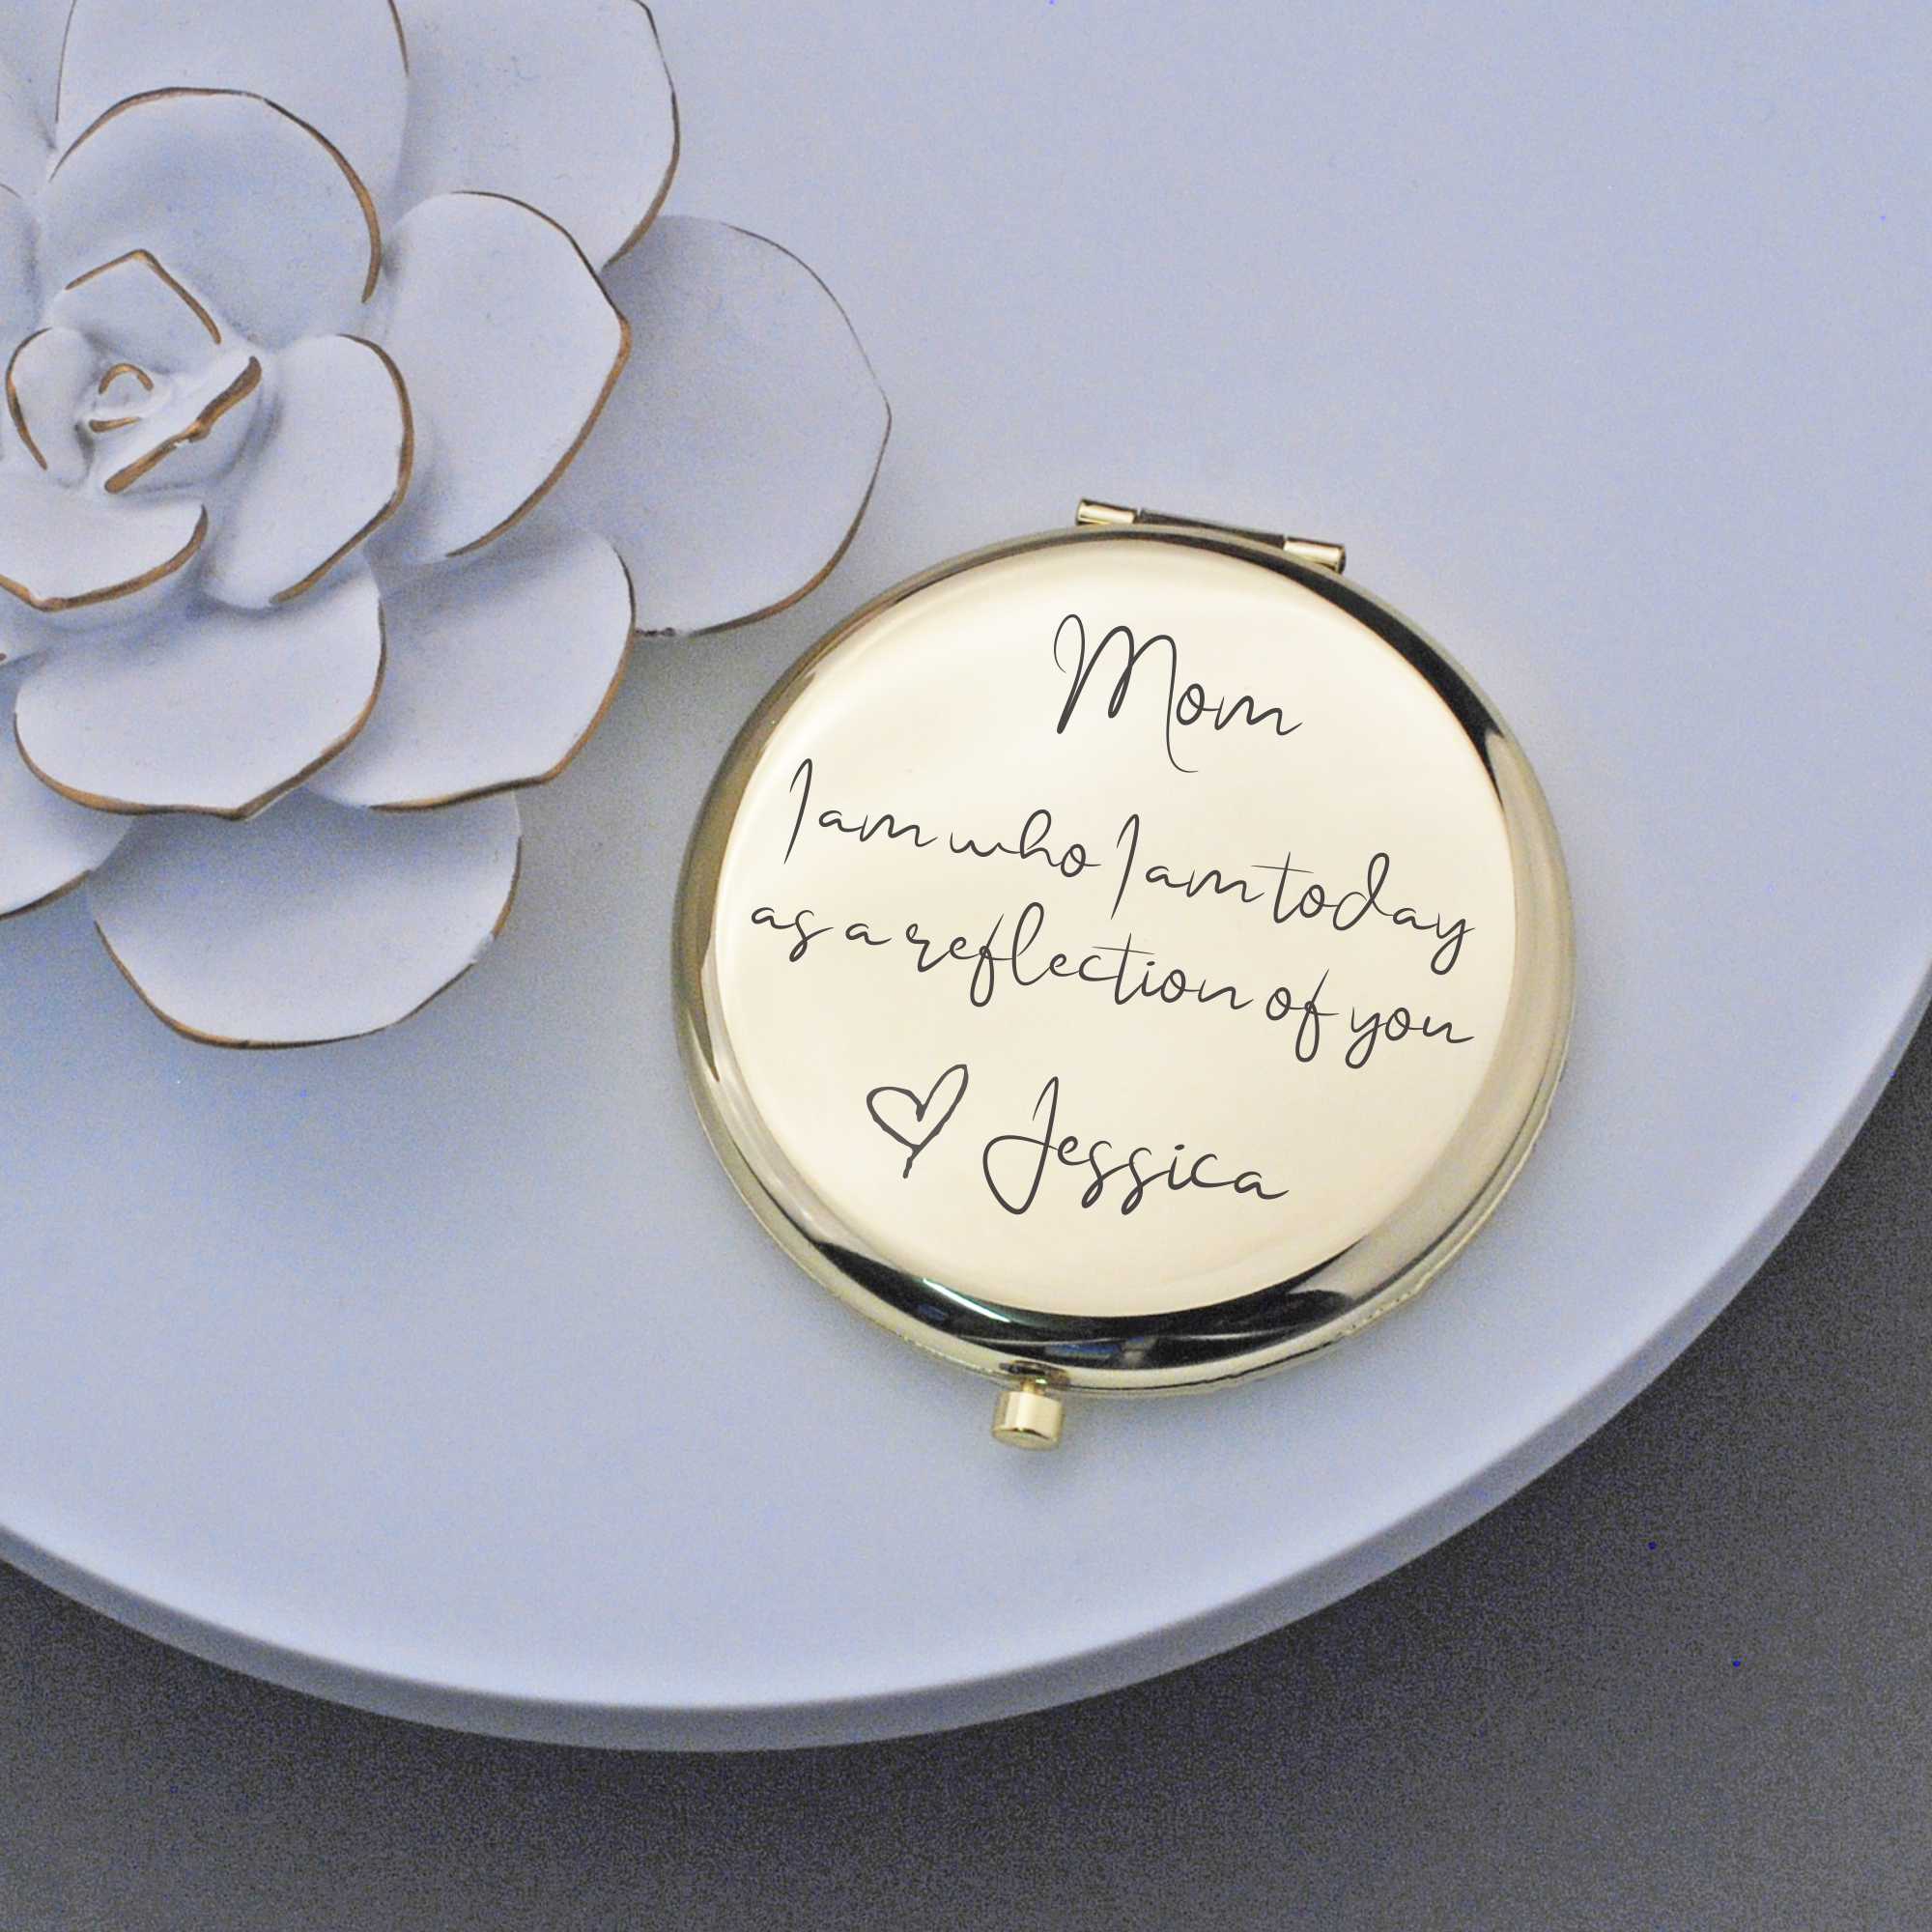 A Reflection of You - Compact Mirror for Mom